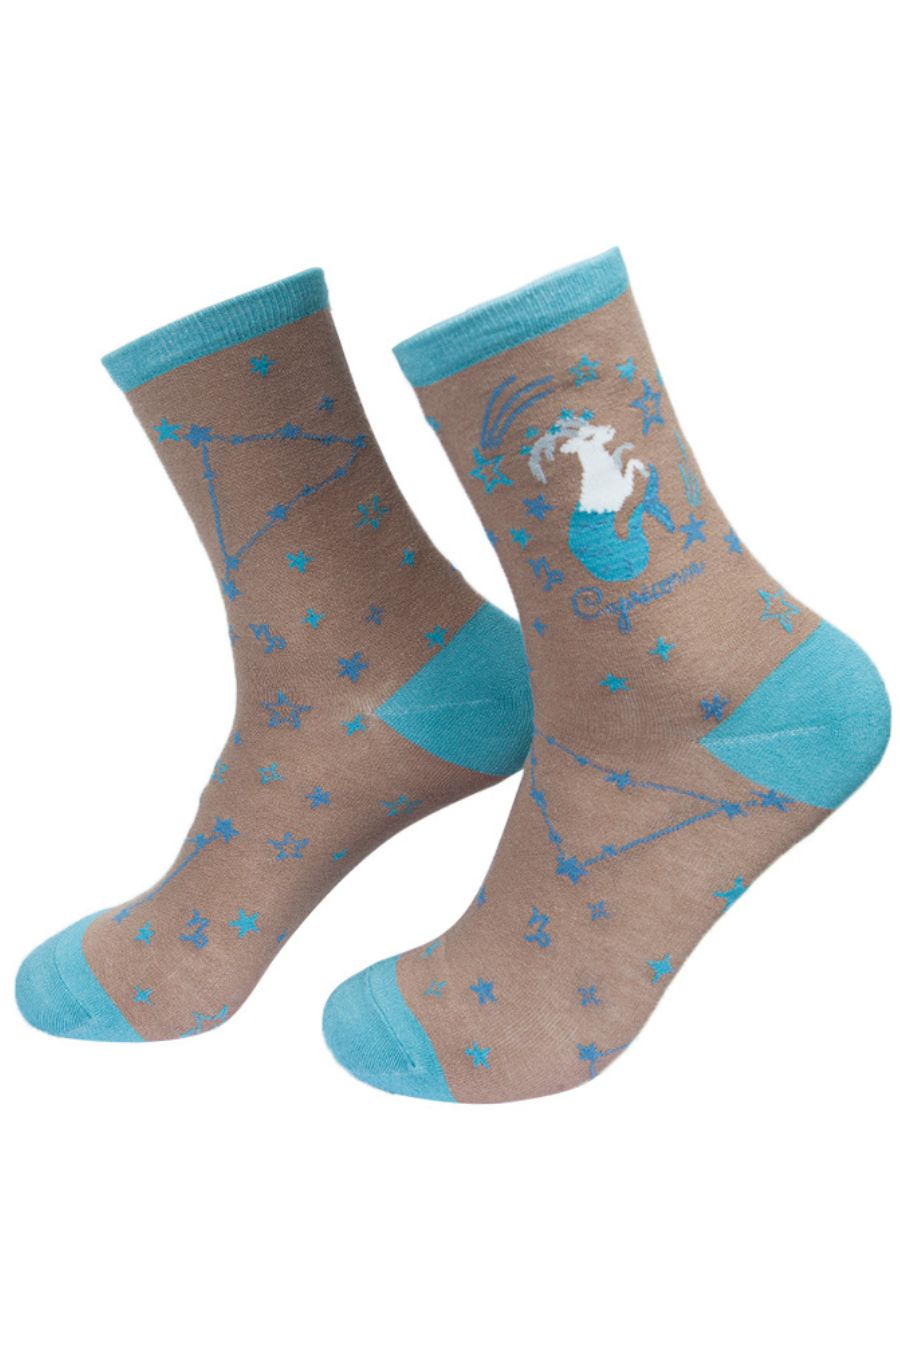 grey, blue ankle socks with the zodiac sign and celestial constellaion of capricorn